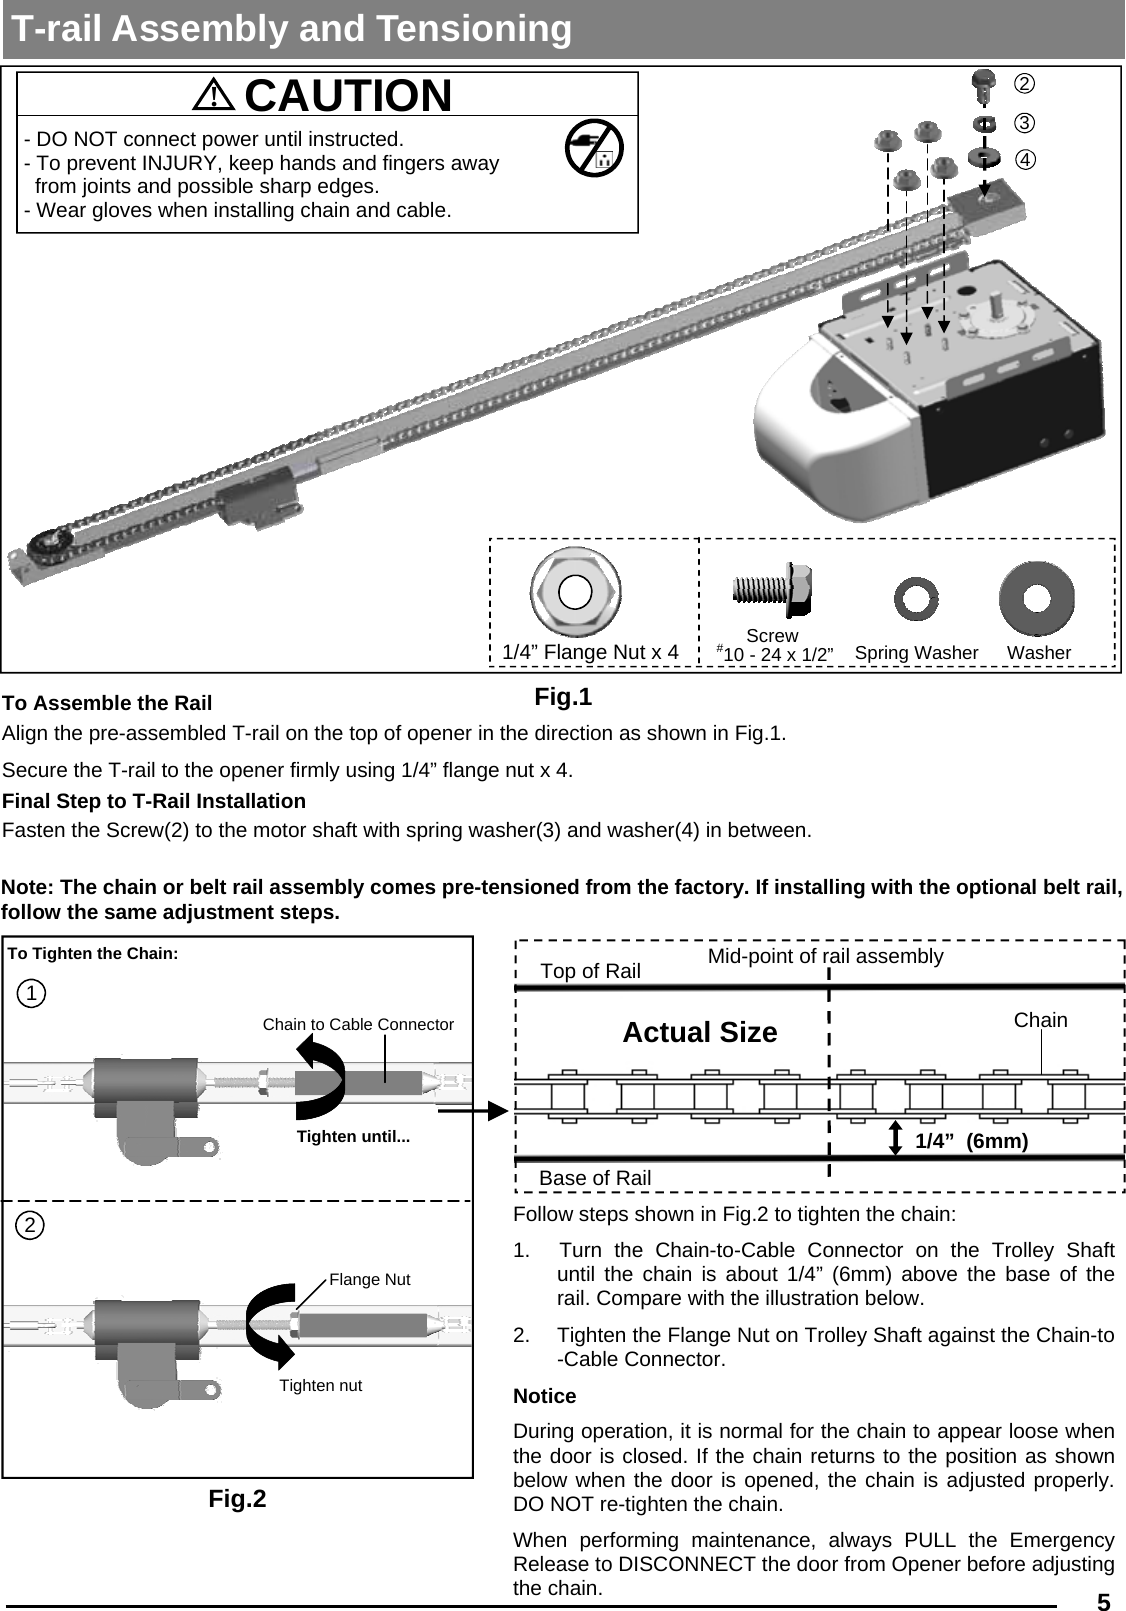  5  Fig.2 1 Tighten until... 2 Tighten nut Flange Nut Chain to Cable Connector To Tighten the Chain: Follow steps shown in Fig.2 to tighten the chain: 1.   Turn the Chain-to-Cable Connector on the Trolley Shaft  until the chain is about 1/4” (6mm) above the base of the rail. Compare with the illustration below. 2.  Tighten the Flange Nut on Trolley Shaft against the Chain-to-Cable Connector. Notice During operation, it is normal for the chain to appear loose when the door is closed. If the chain returns to the position as shown   below when the door is opened, the chain is adjusted properly.     DO NOT re-tighten the chain. When performing maintenance, always PULL the Emergency Release to DISCONNECT the door from Opener before adjusting the chain. 1/4”  (6mm) Base of Rail Mid-point of rail assembly Chain Top of Rail Actual Size T-rail Assembly and Tensioning  Fig.1 !  CAUTION   - DO NOT connect power until instructed. - To prevent INJURY, keep hands and fingers away from joints and possible sharp edges. - Wear gloves when installing chain and cable. 2 3 4 1/4” Flange Nut x 4 Screw Spring Washer Washer To Assemble the Rail  Align the pre-assembled T-rail on the top of opener in the direction as shown in Fig.1.  Secure the T-rail to the opener firmly using 1/4” flange nut x 4.  Final Step to T-Rail Installation Fasten the Screw(2) to the motor shaft with spring washer(3) and washer(4) in between. Note: The chain or belt rail assembly comes pre-tensioned from the factory. If installing with the optional belt rail, follow the same adjustment steps. #10 - 24 x 1/2” 